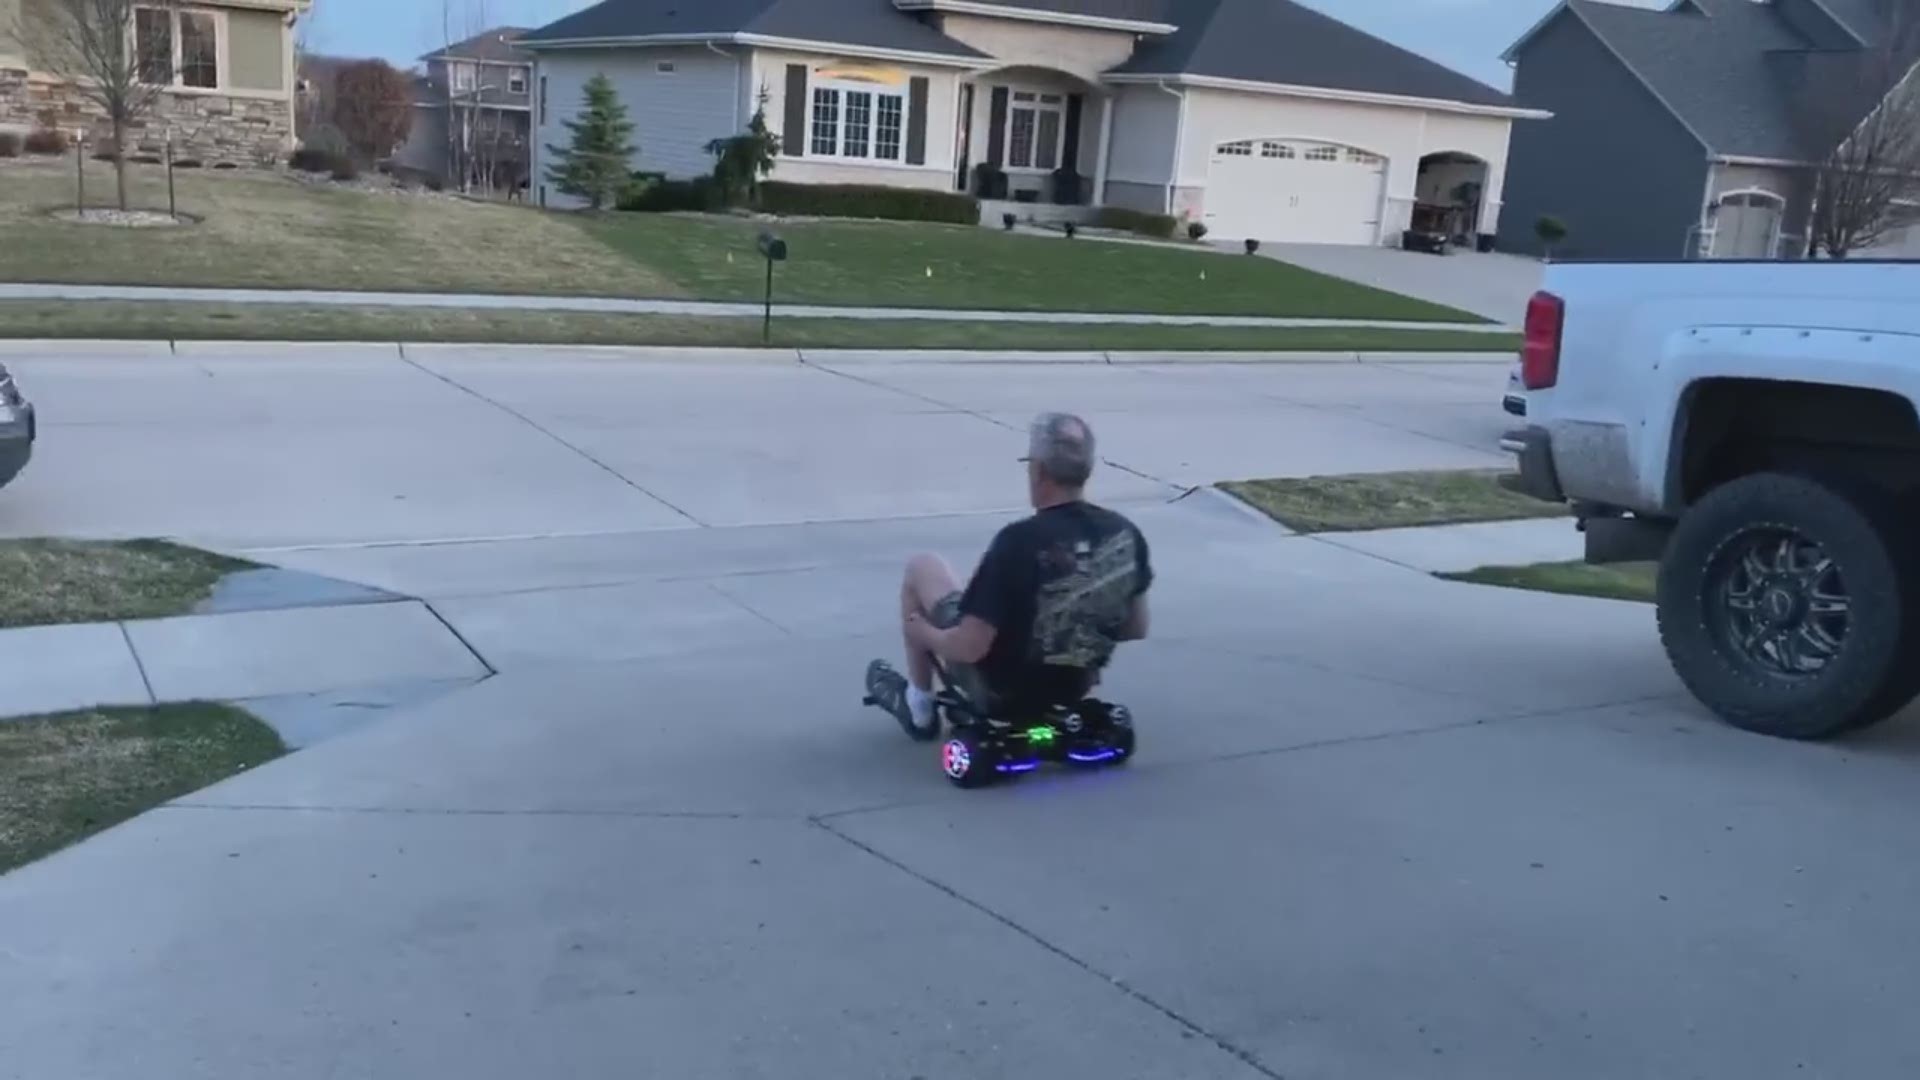 Dad riding motorized scooter takes a tumble